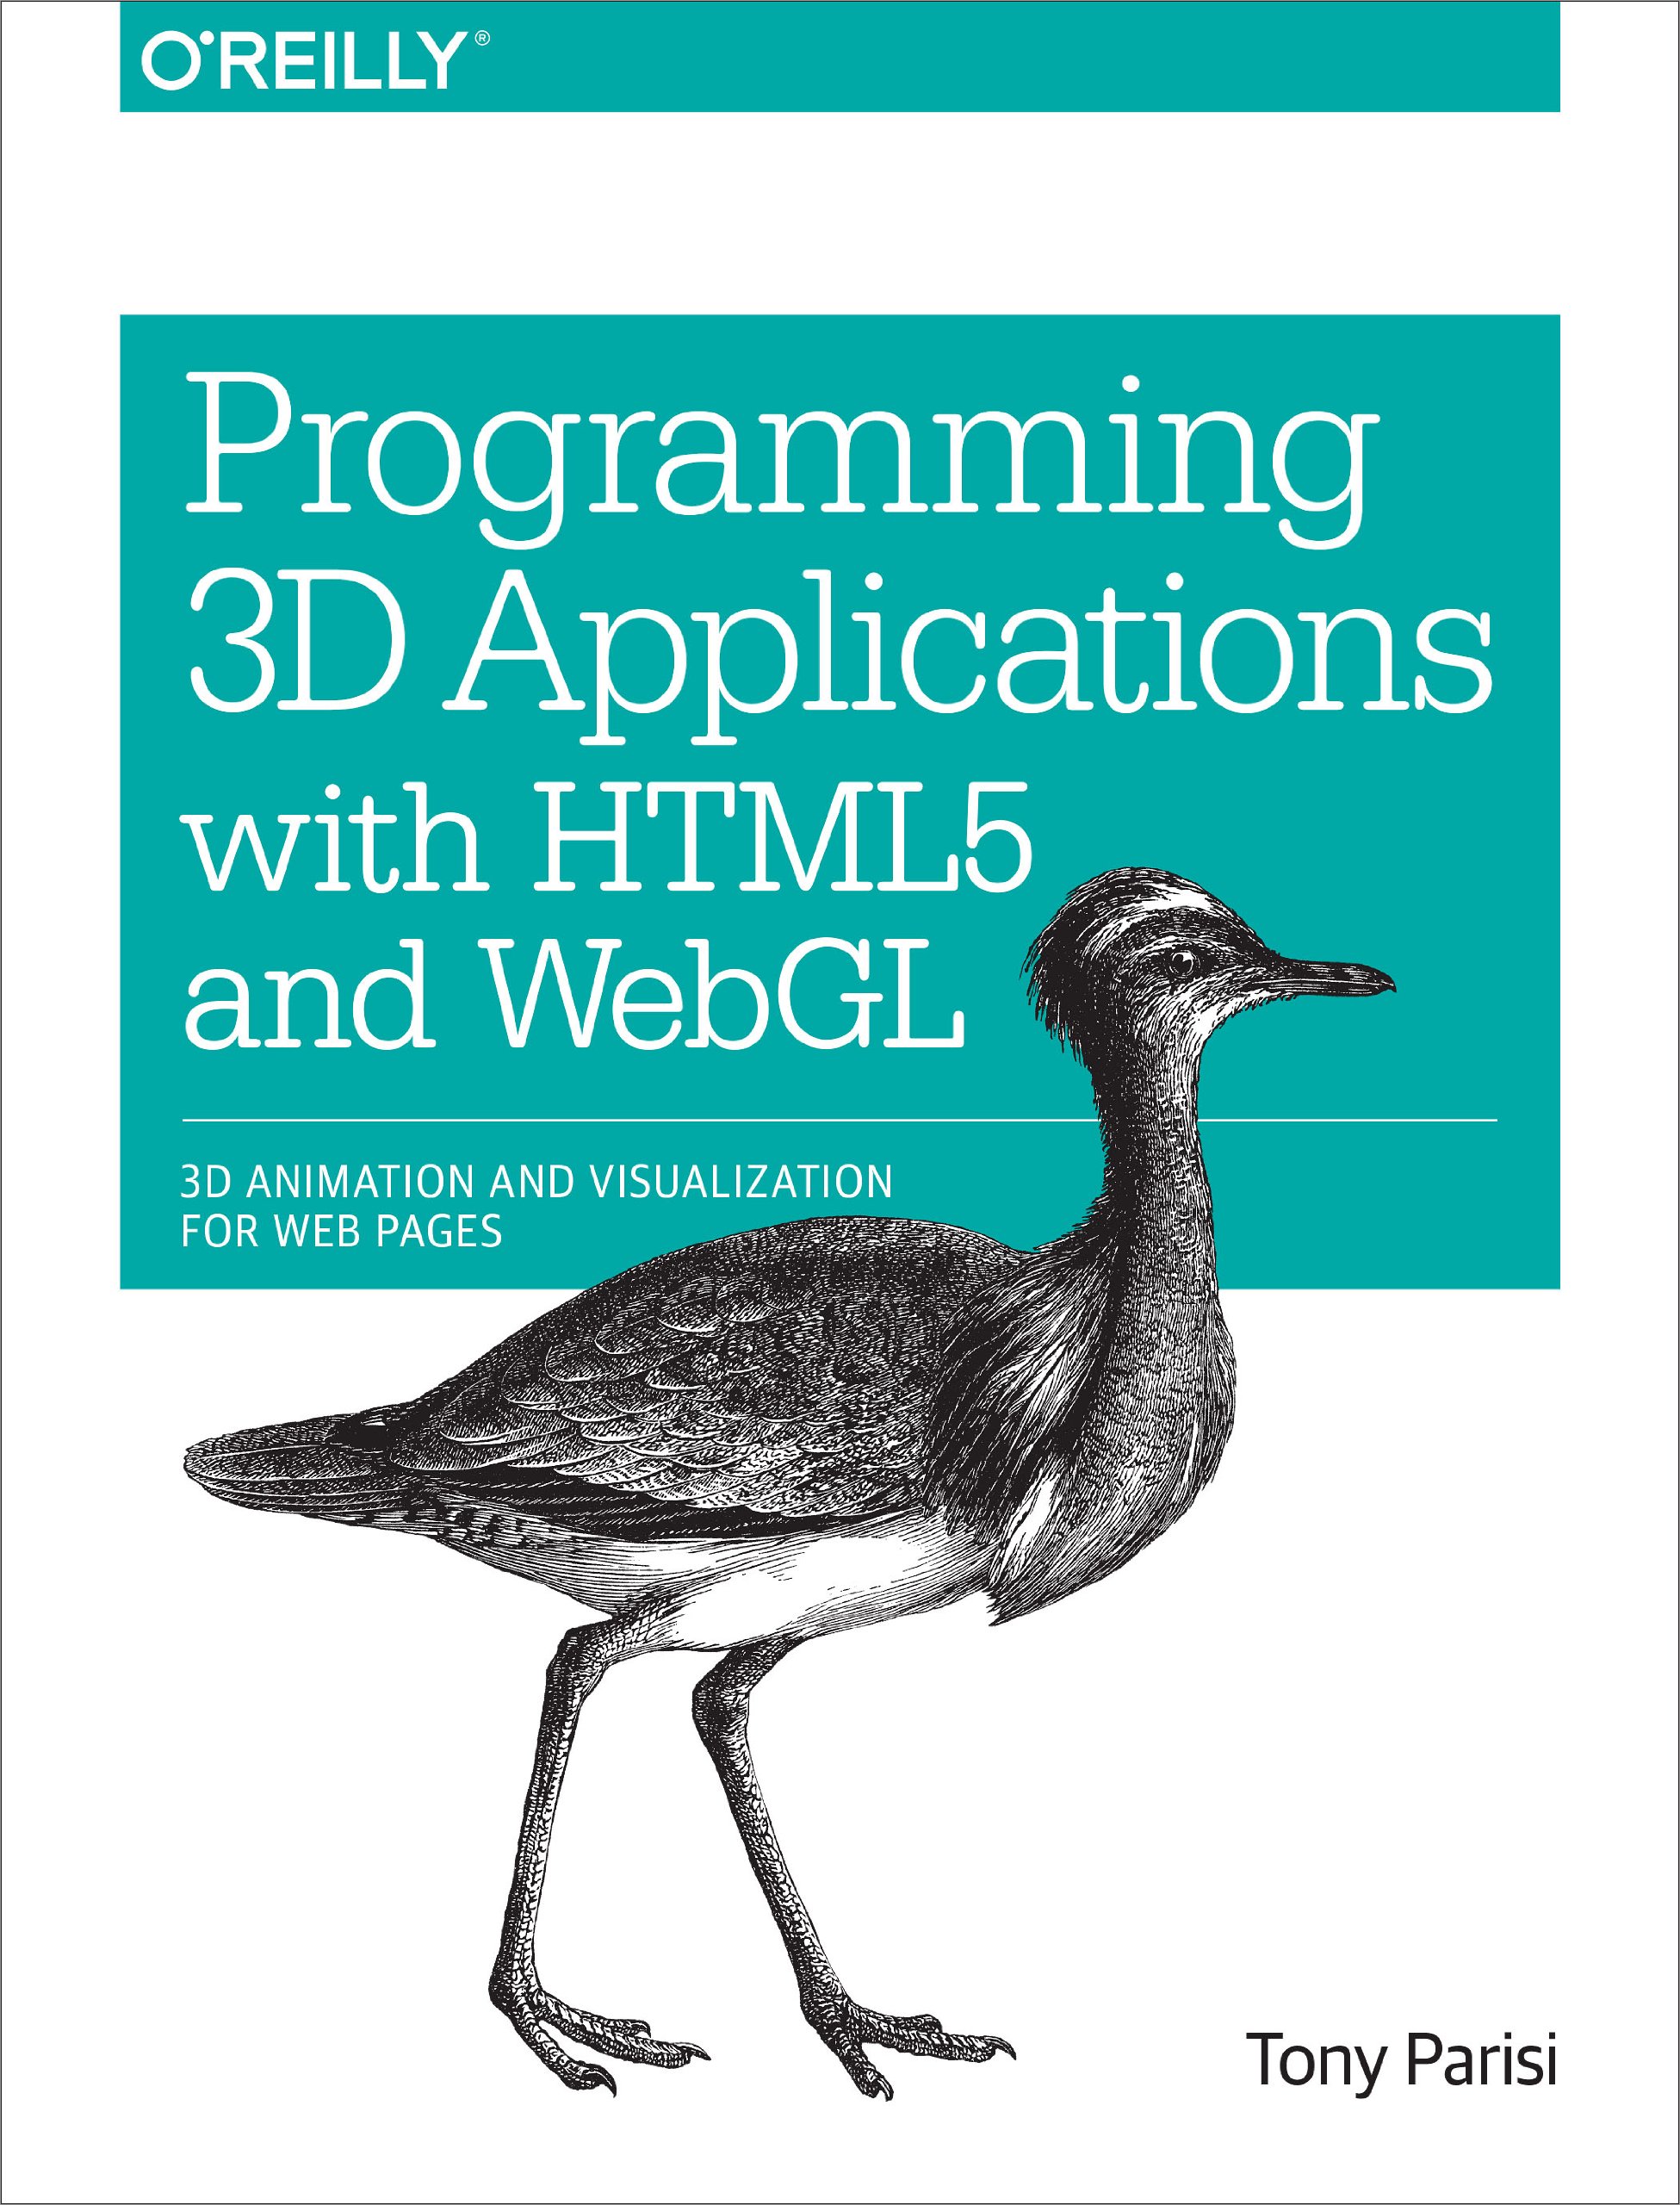 Programming 3D Applications with HTML5 and WebGL: 3D Animation and Visualization for Web Pages